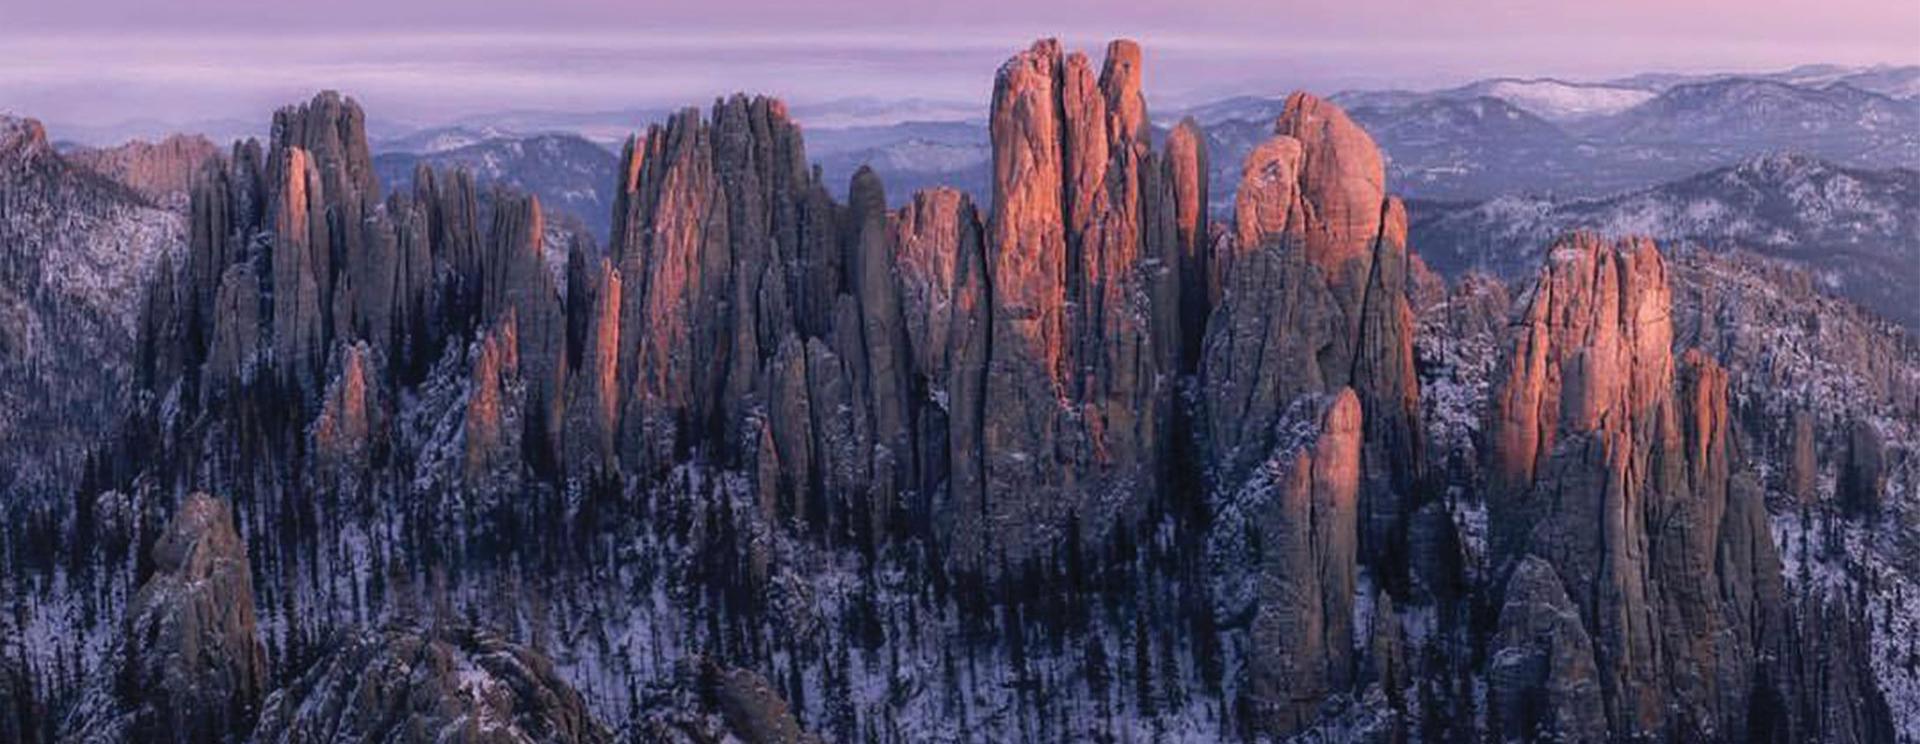 The 5 Most Remarkable Photos of the Black Hills in March 2019